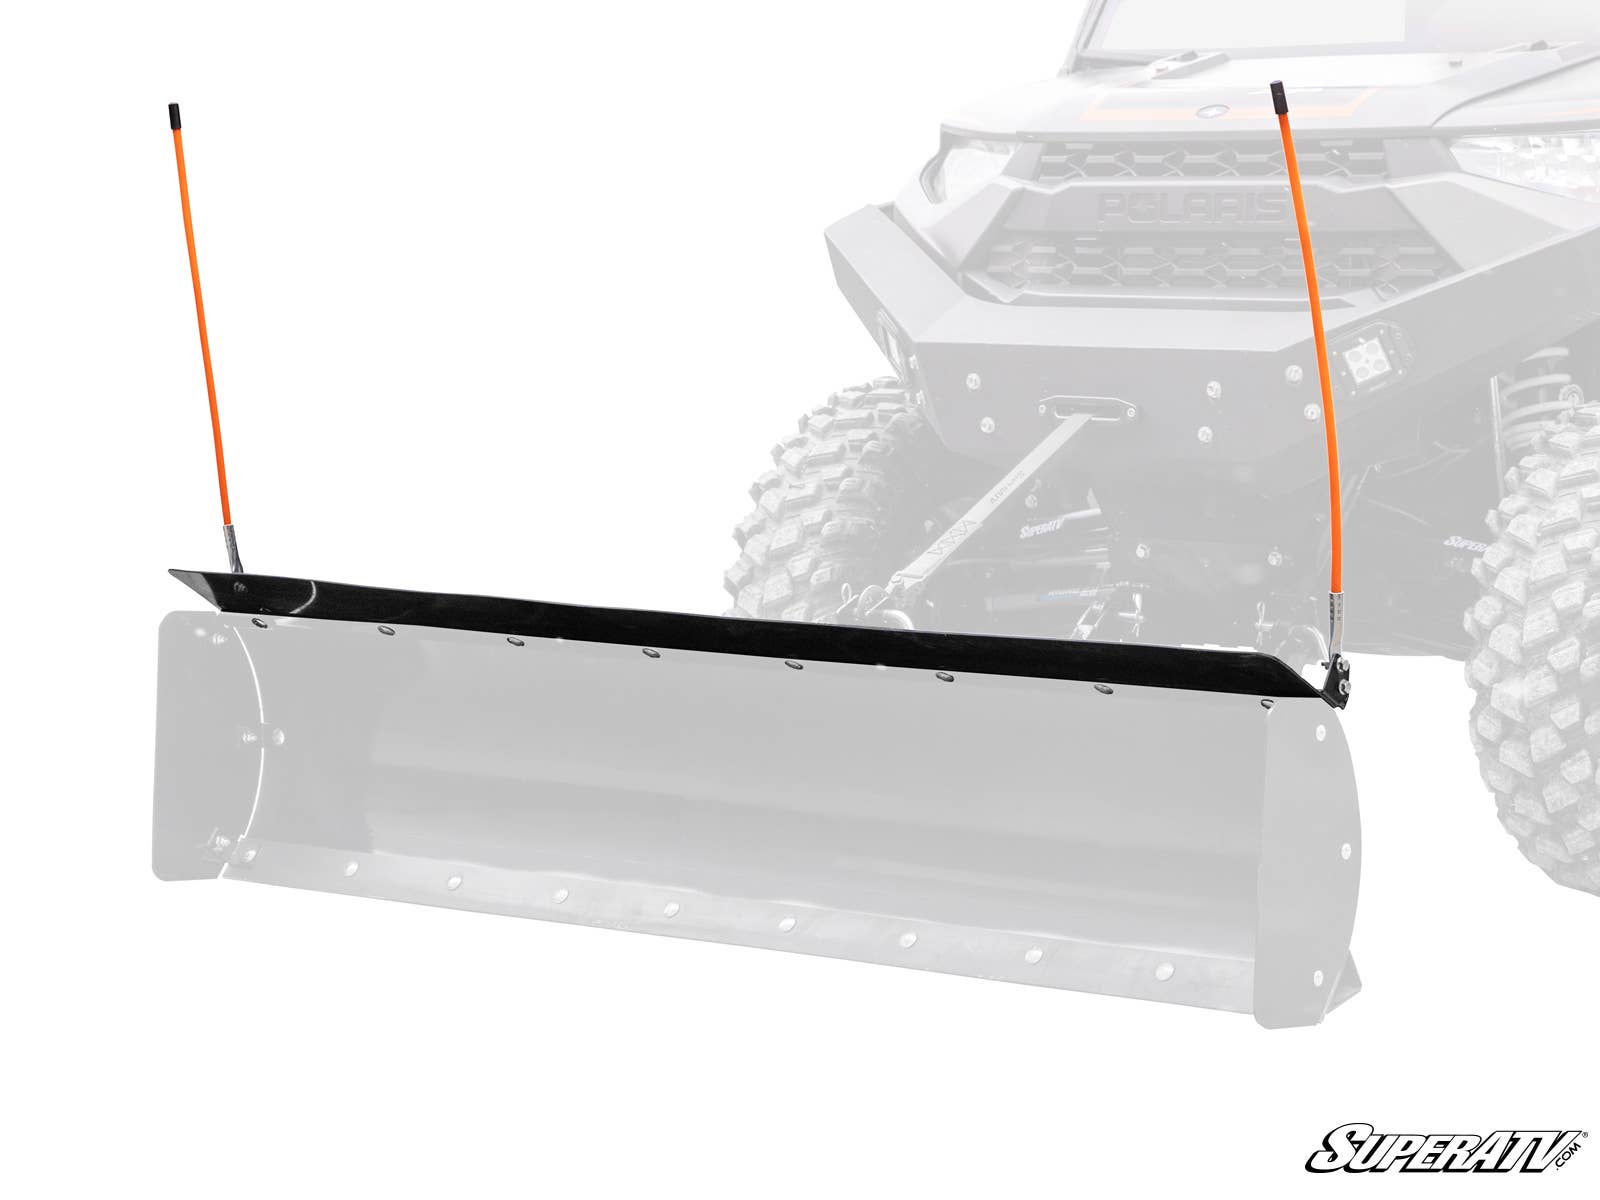 PLOW PRO SNOW PLOW DEFLECTOR AND MARKER KIT